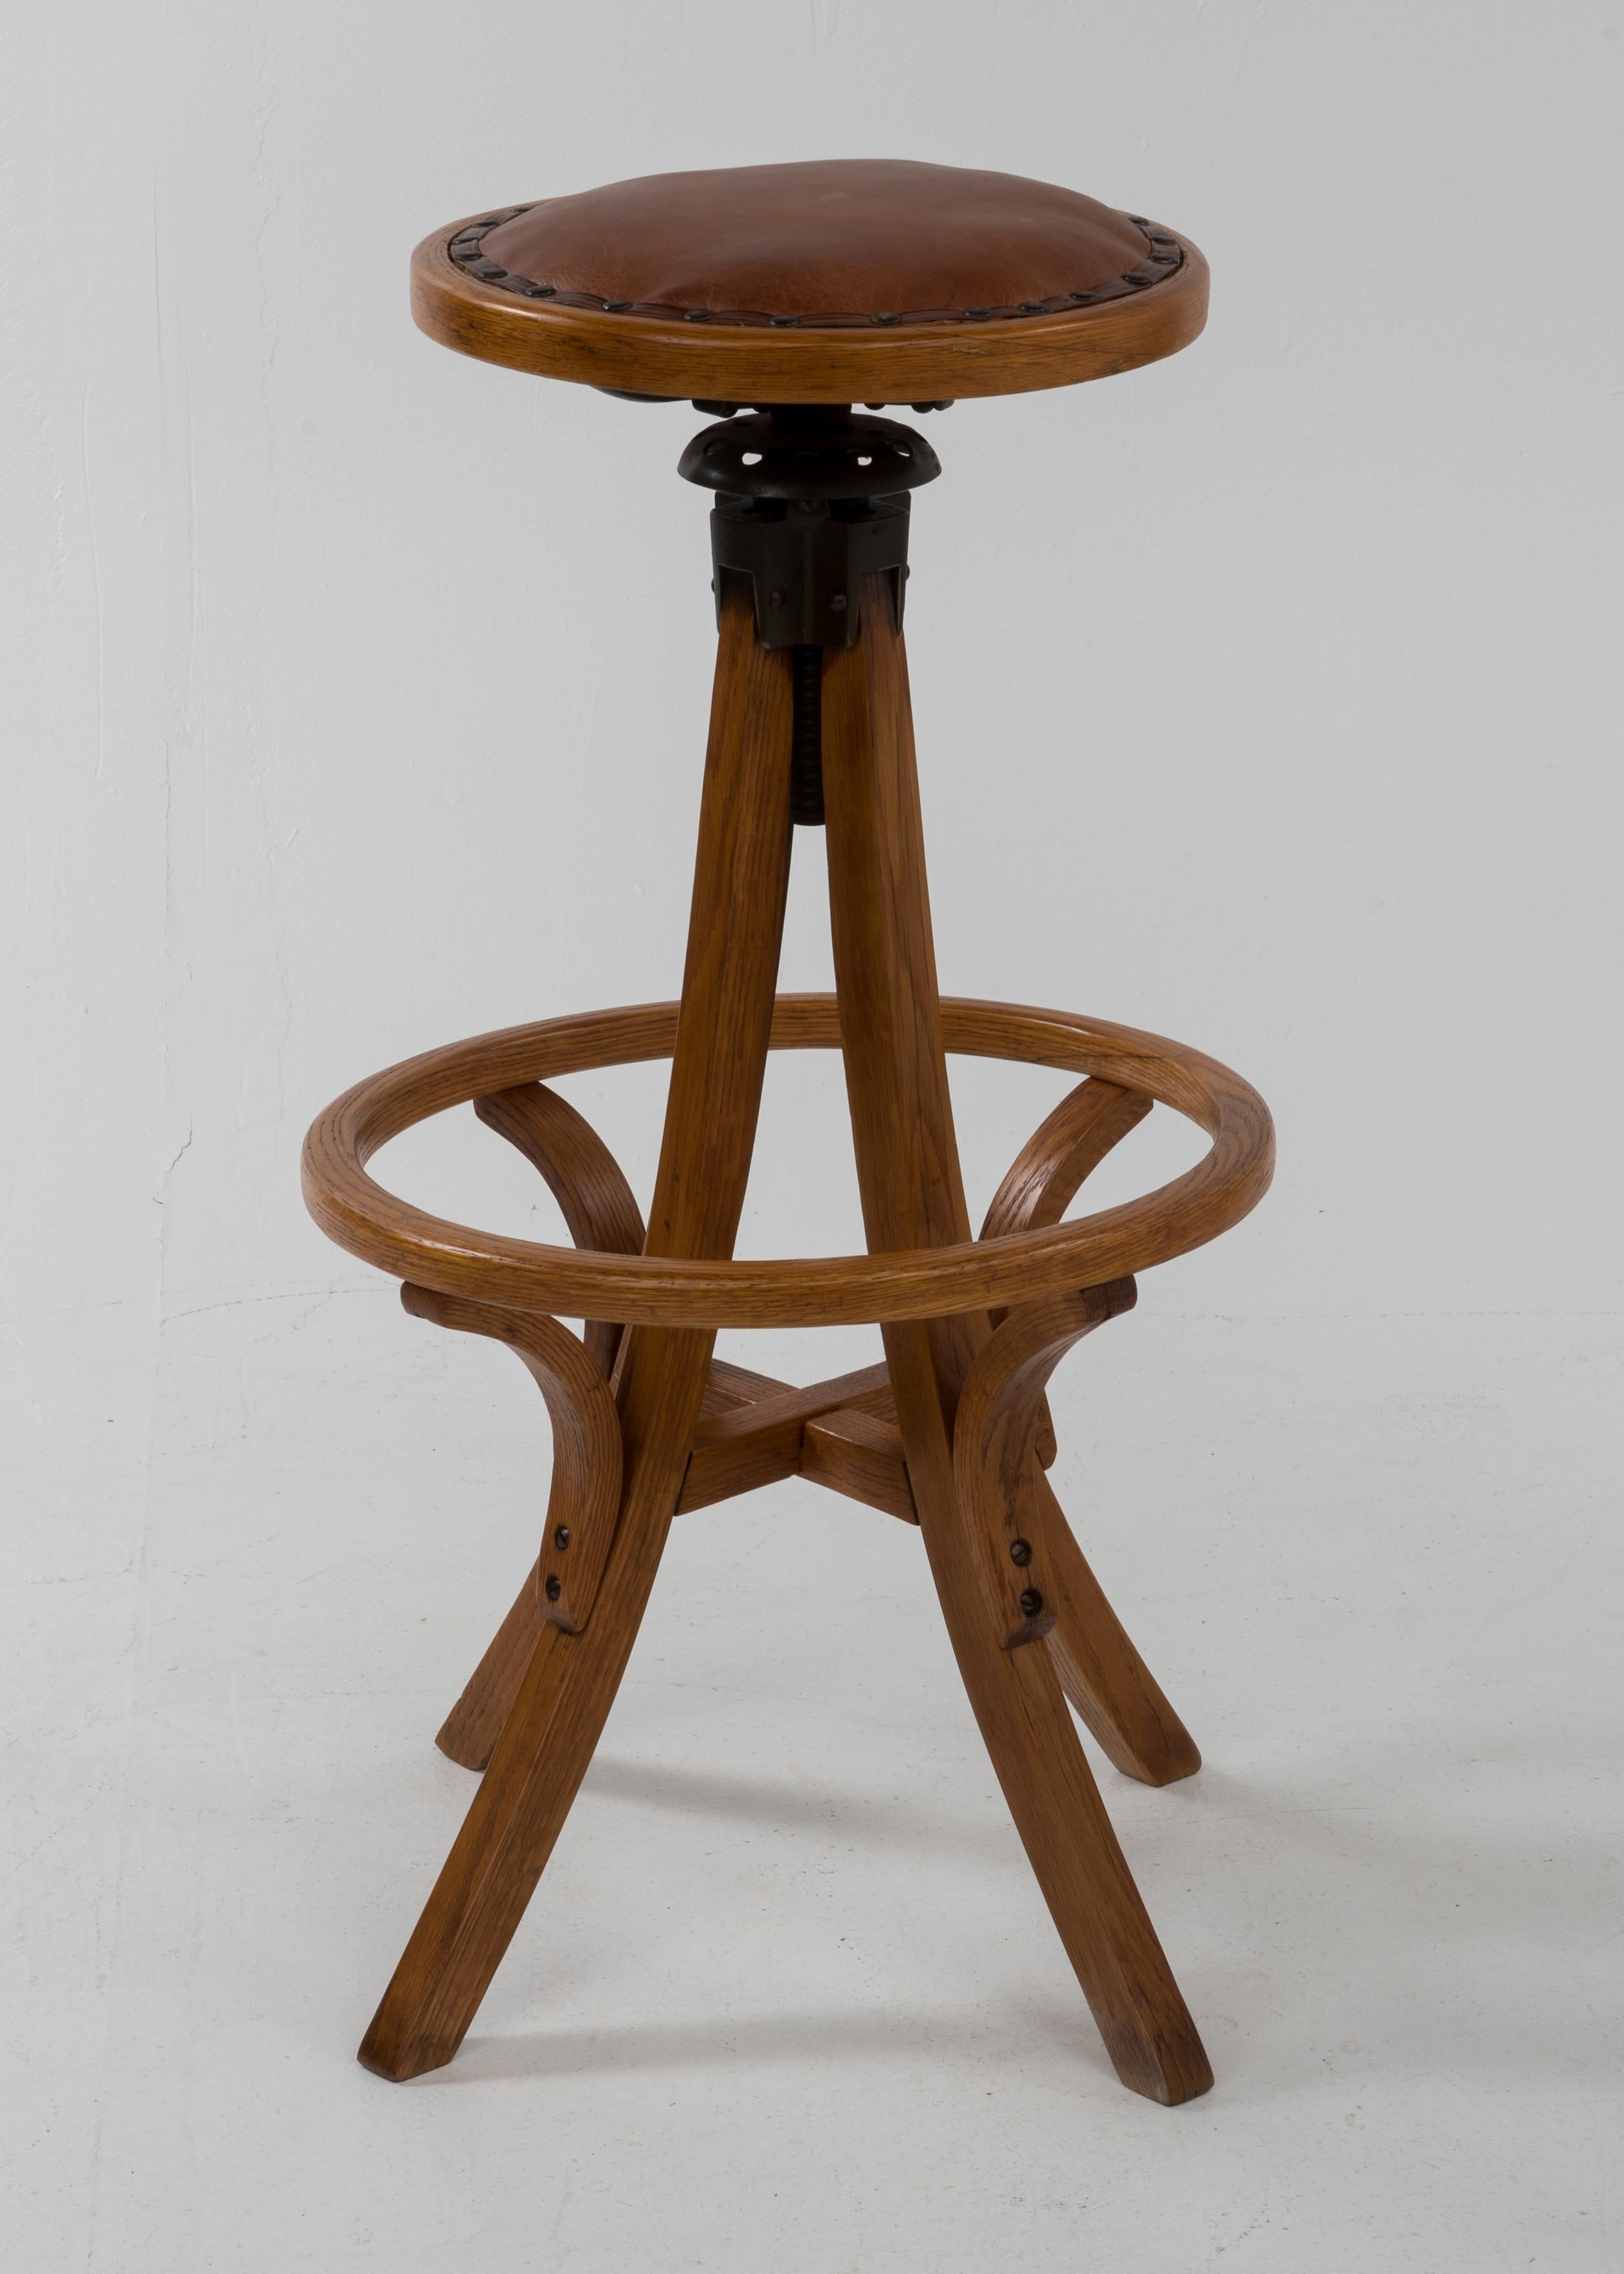 Early 20th Century Antique Architect Architectural Industrial Oak Drafting Stool 5